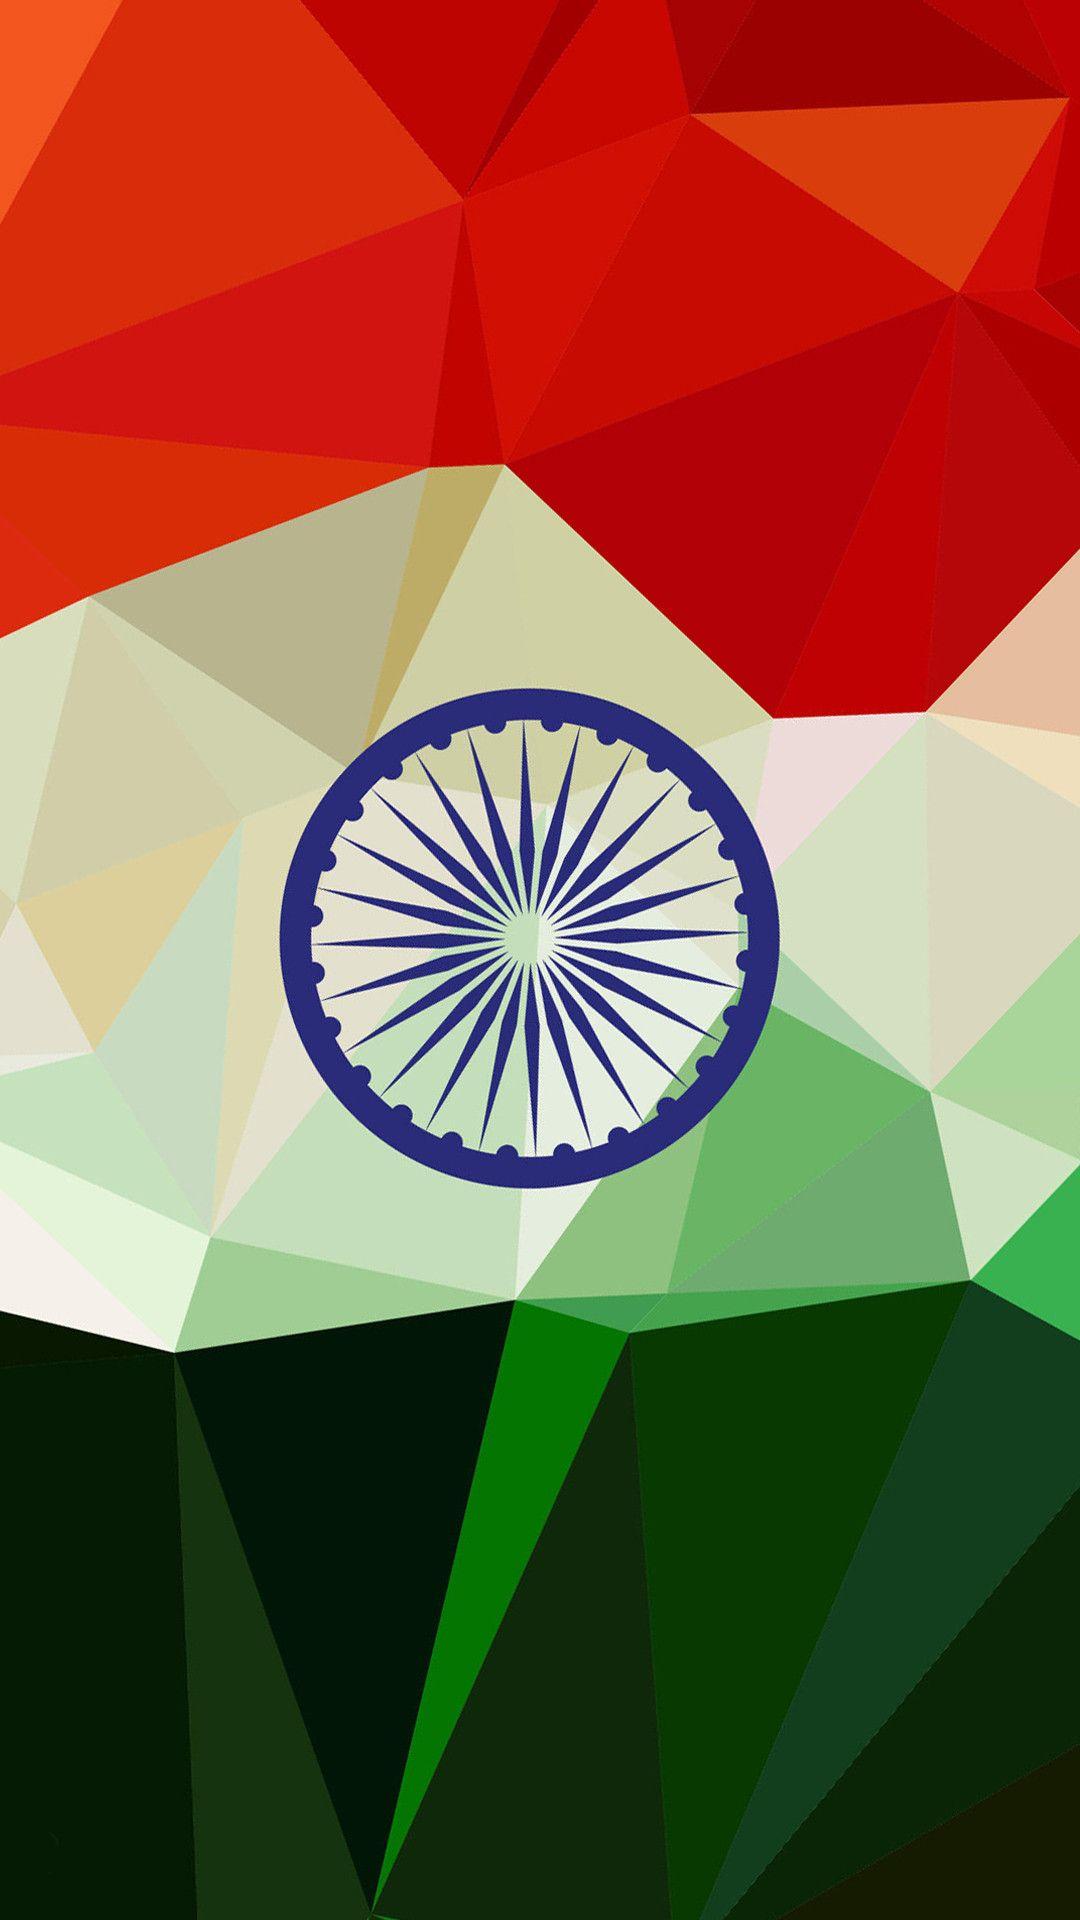 Indian National Flag Wallpapers - Top Free Indian National Flag